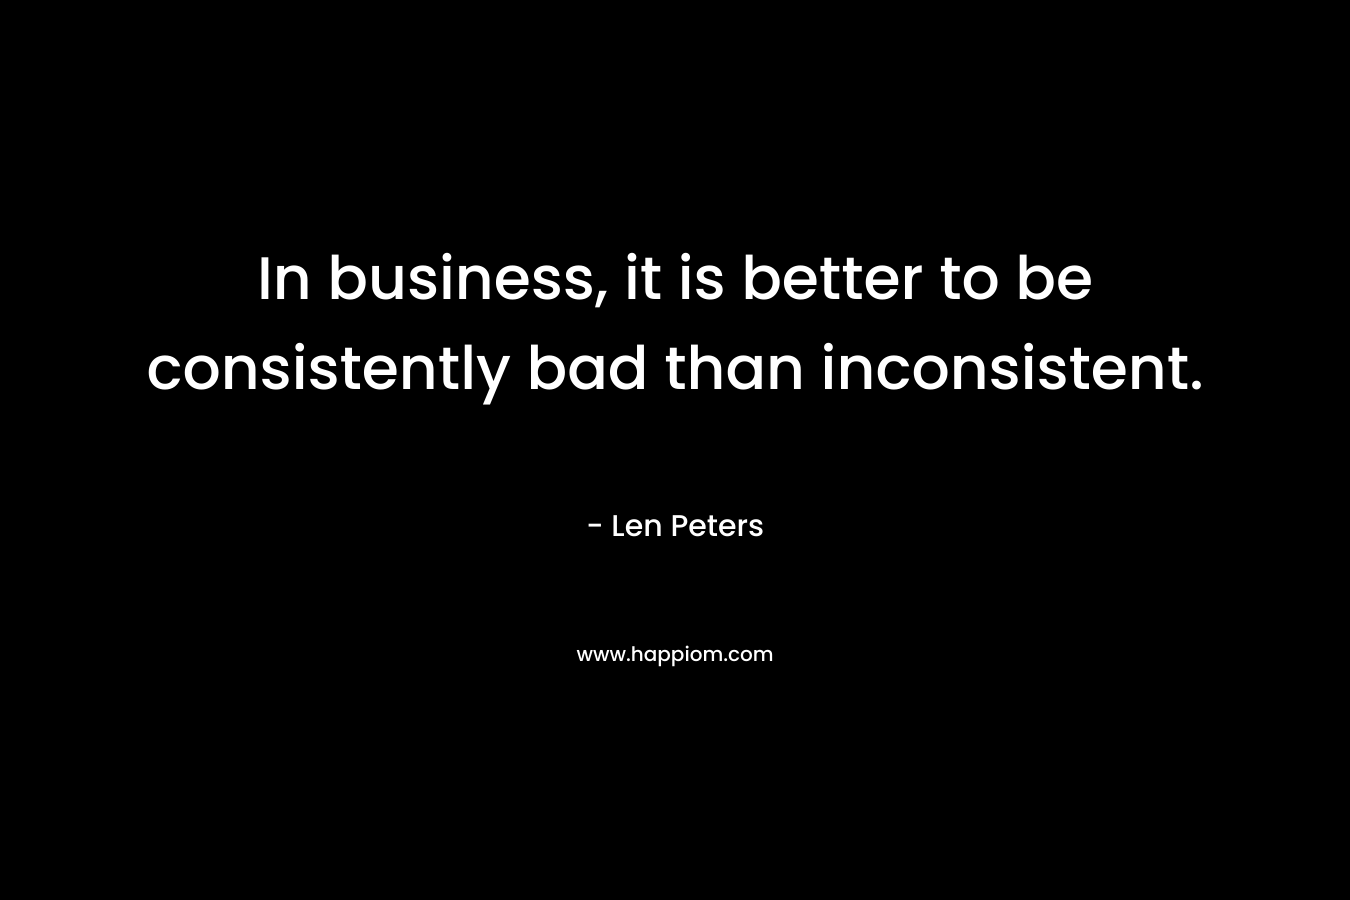 In business, it is better to be consistently bad than inconsistent.